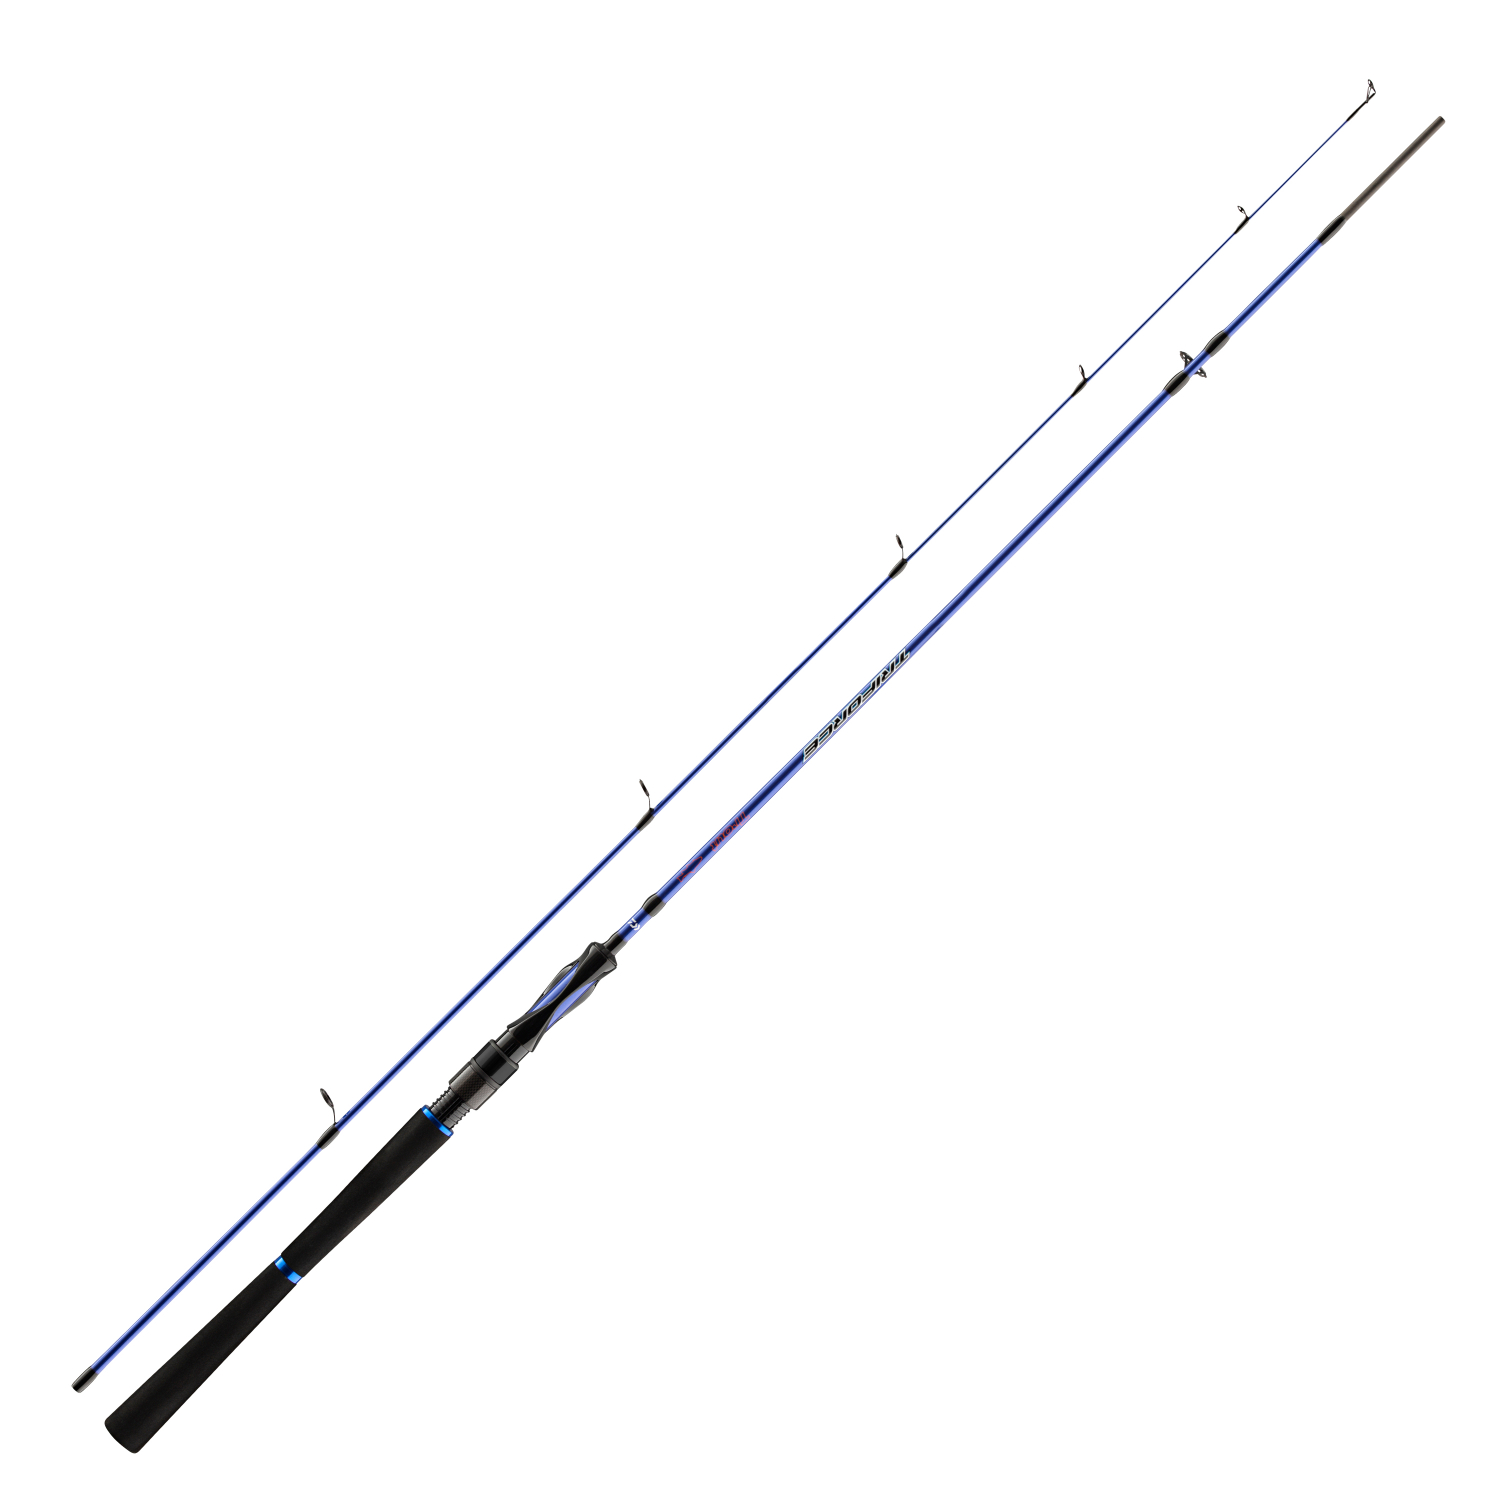 Daiwa Spinning rod Triforce Target Spin (Trout Spin) at low prices